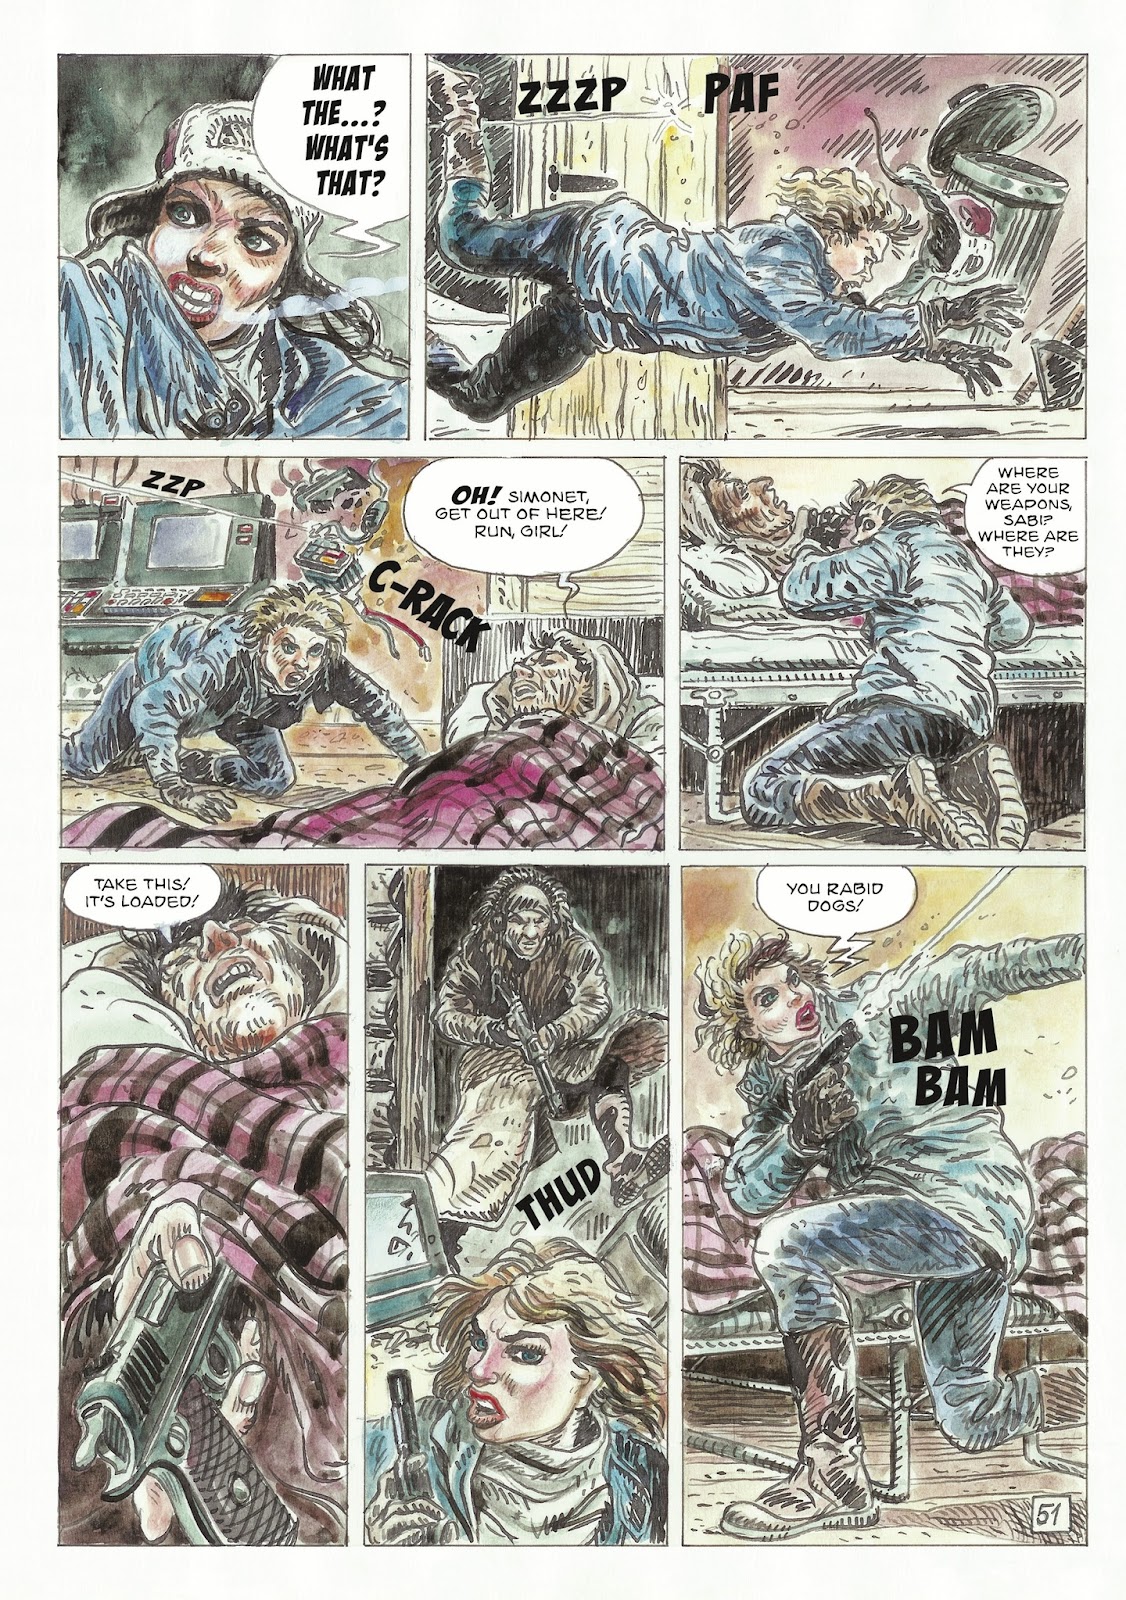 The Man With the Bear issue 1 - Page 53